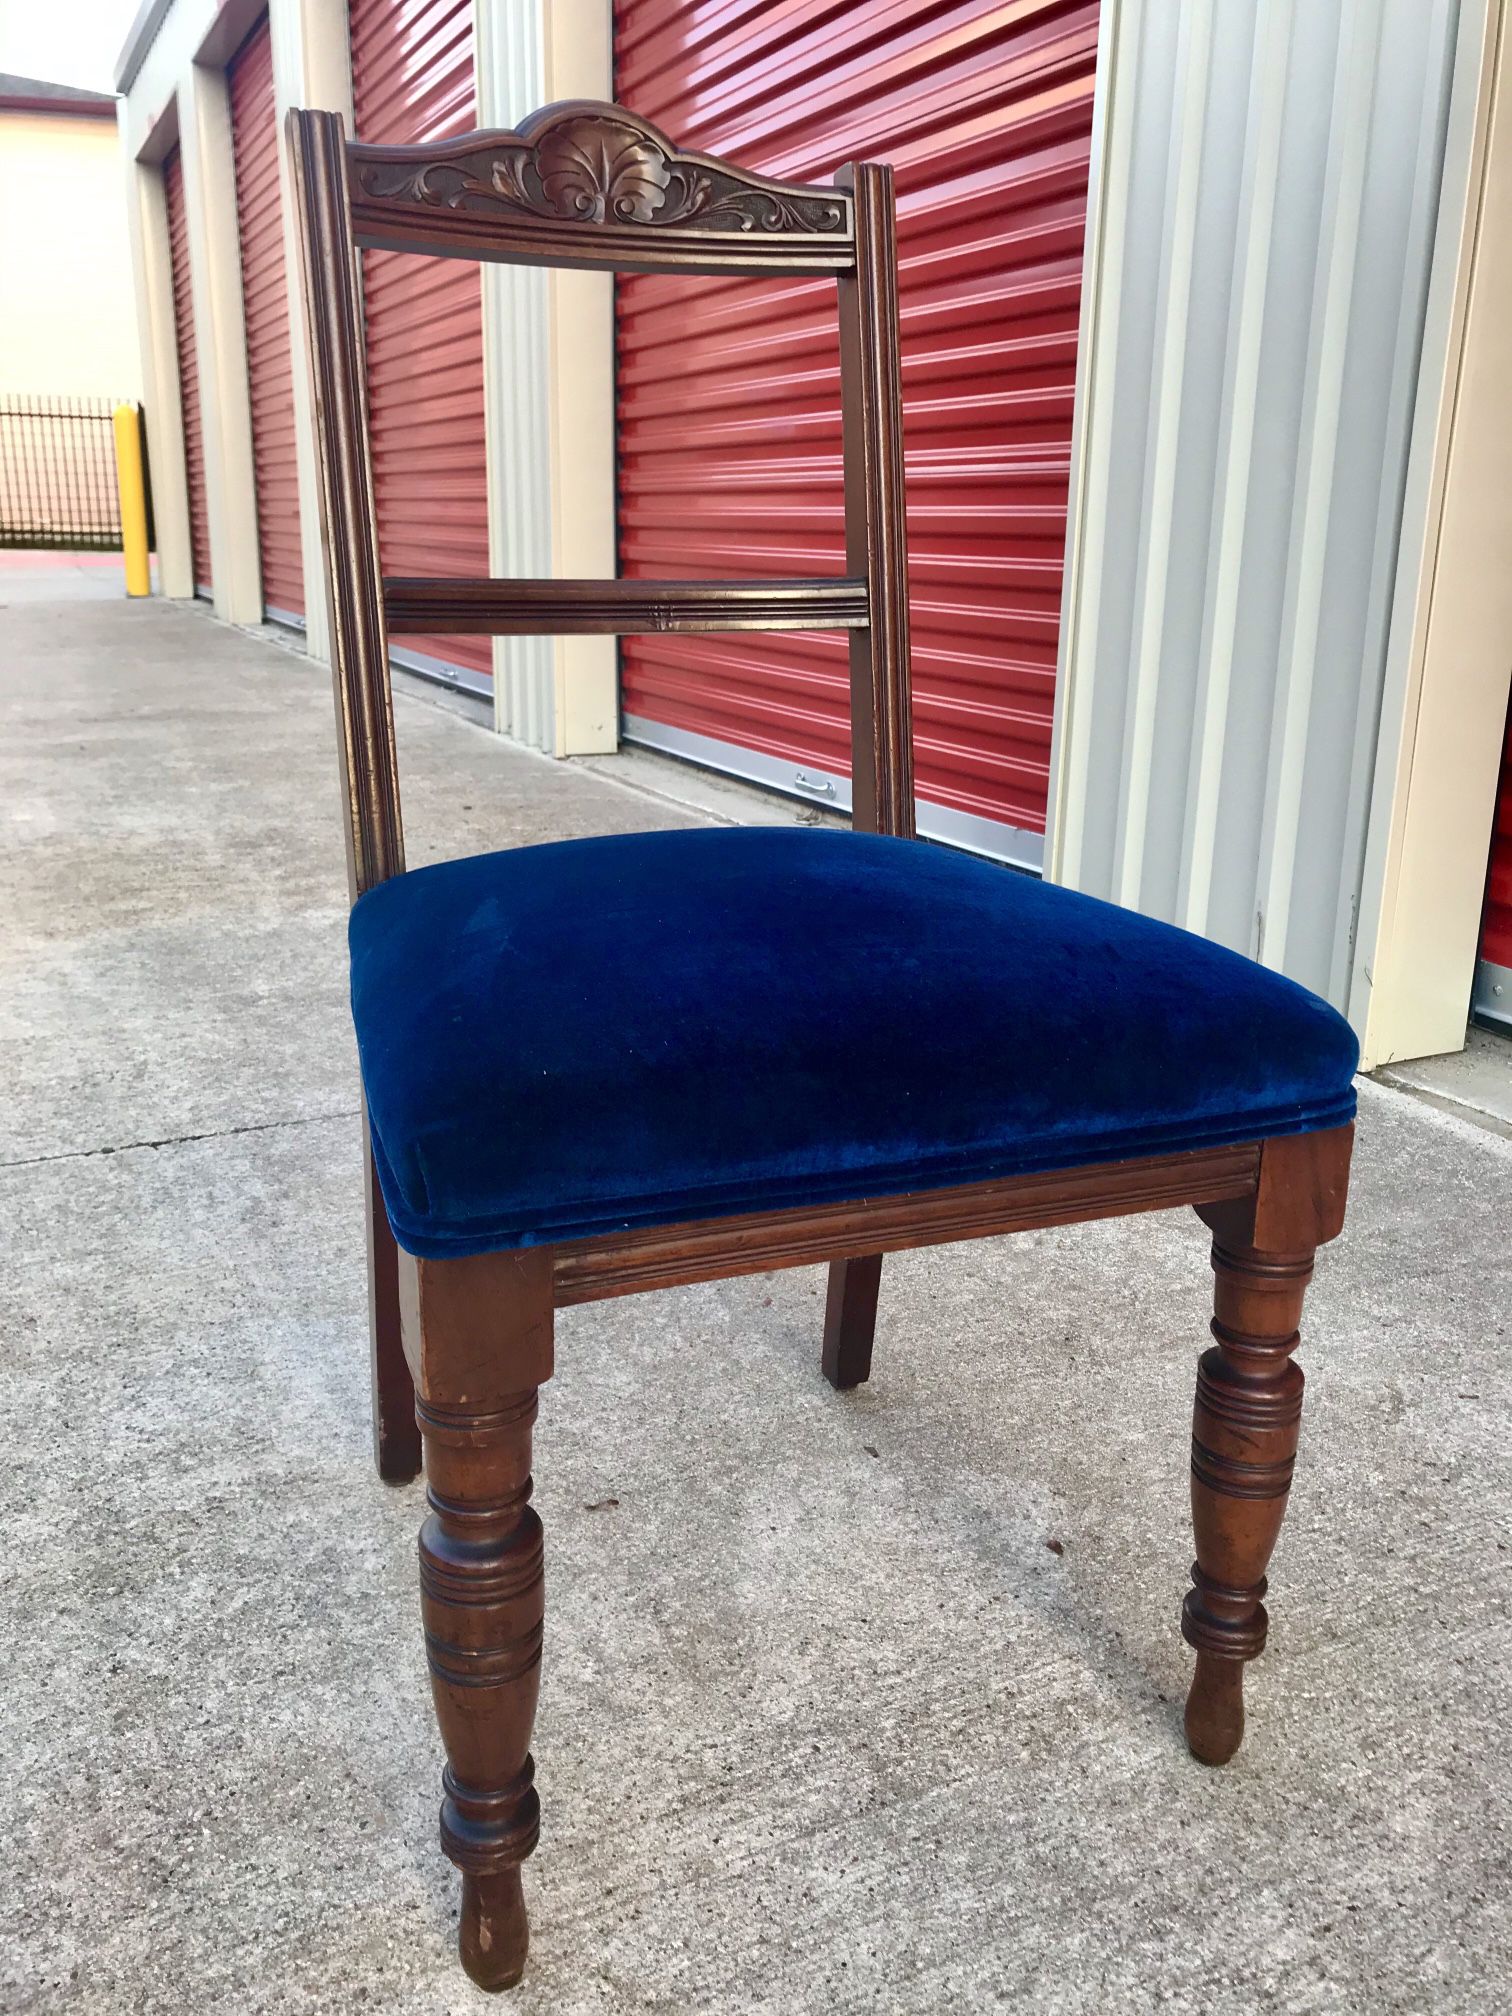 Gorgeous Vintage Wooden Chair with Royal Blue Velvet Seat Cover Fabric